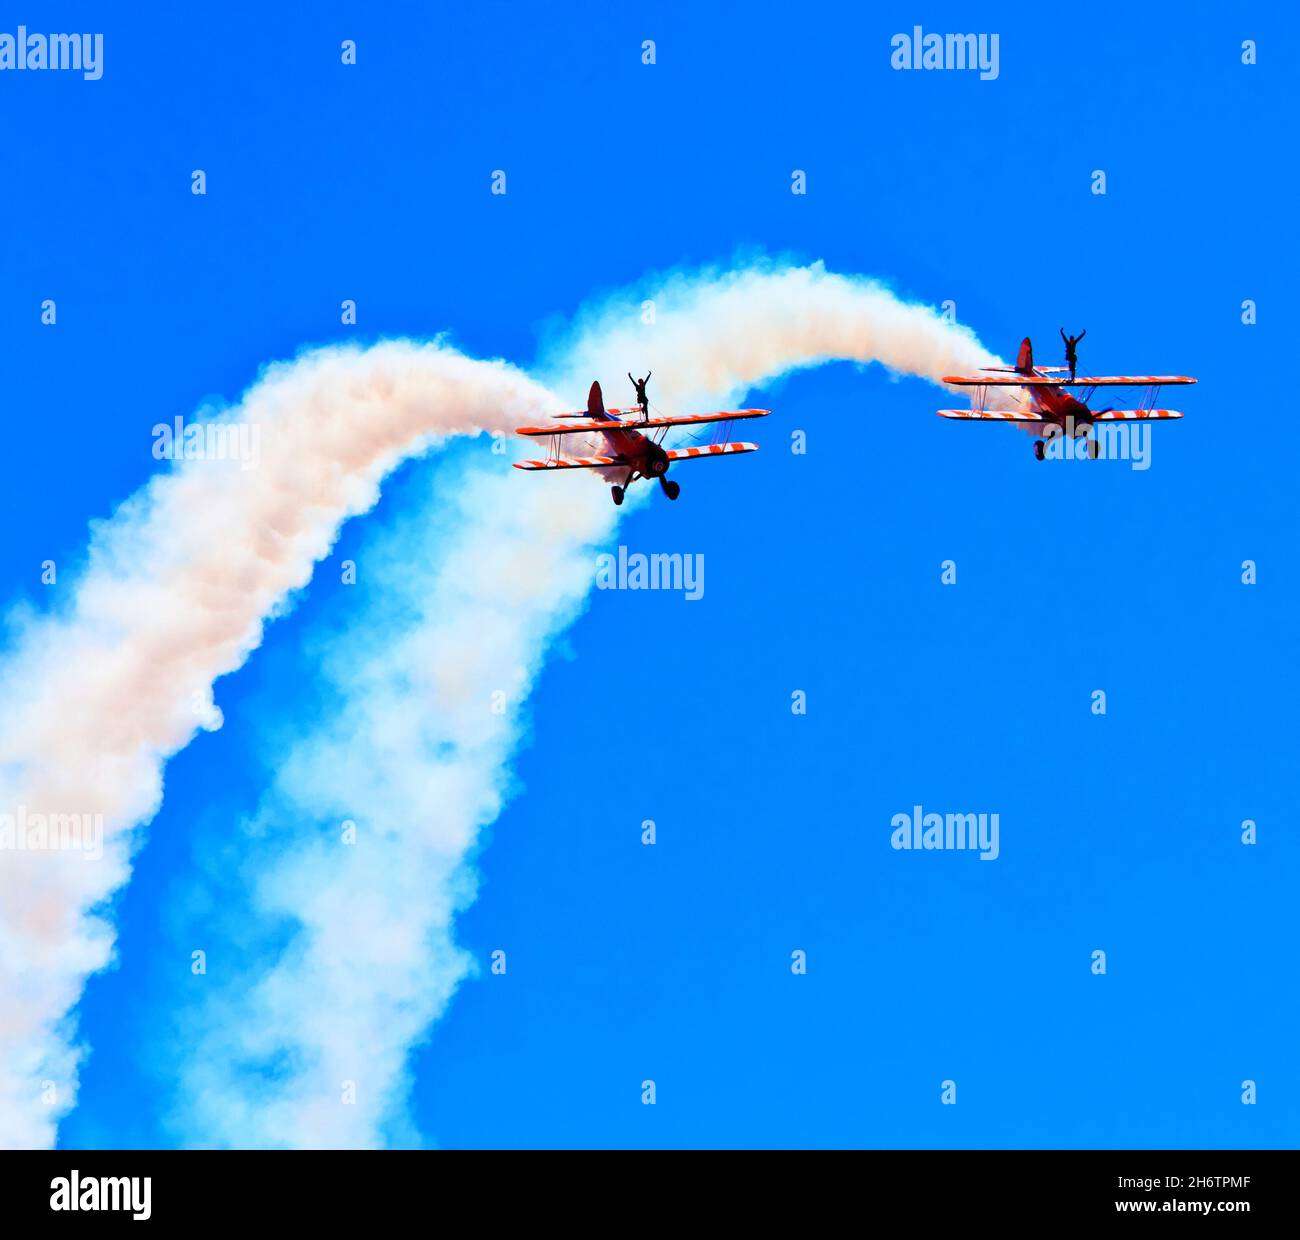 Wing walkers with two biplanes at airshow with blue sky and white smoke Stock Photo